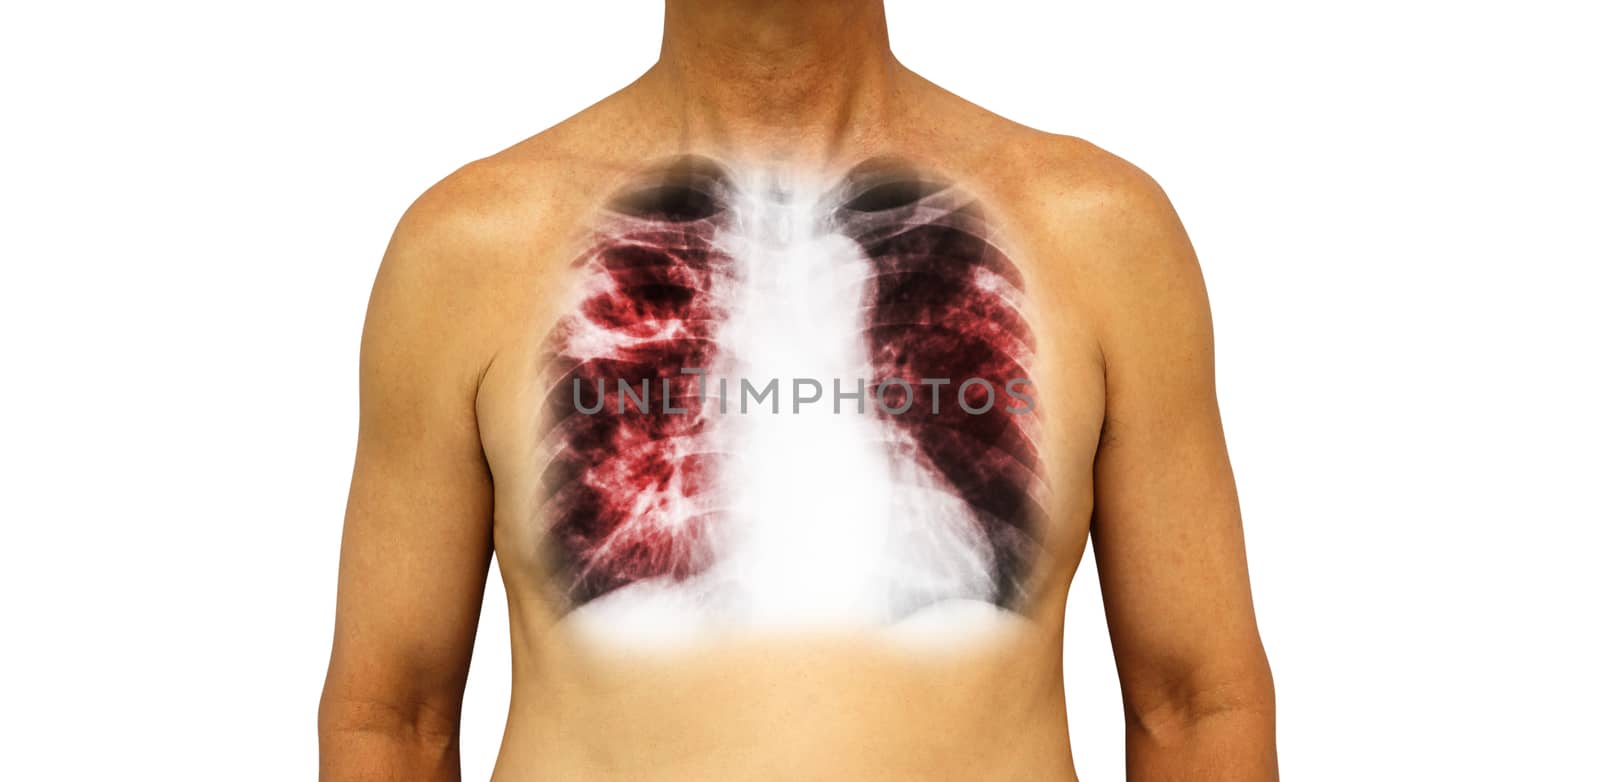 Pulmonary tuberculosis . Human chest with x-ray show cavity at right upper lung and interstitial infiltrate both lung due to infection . Isolated background .